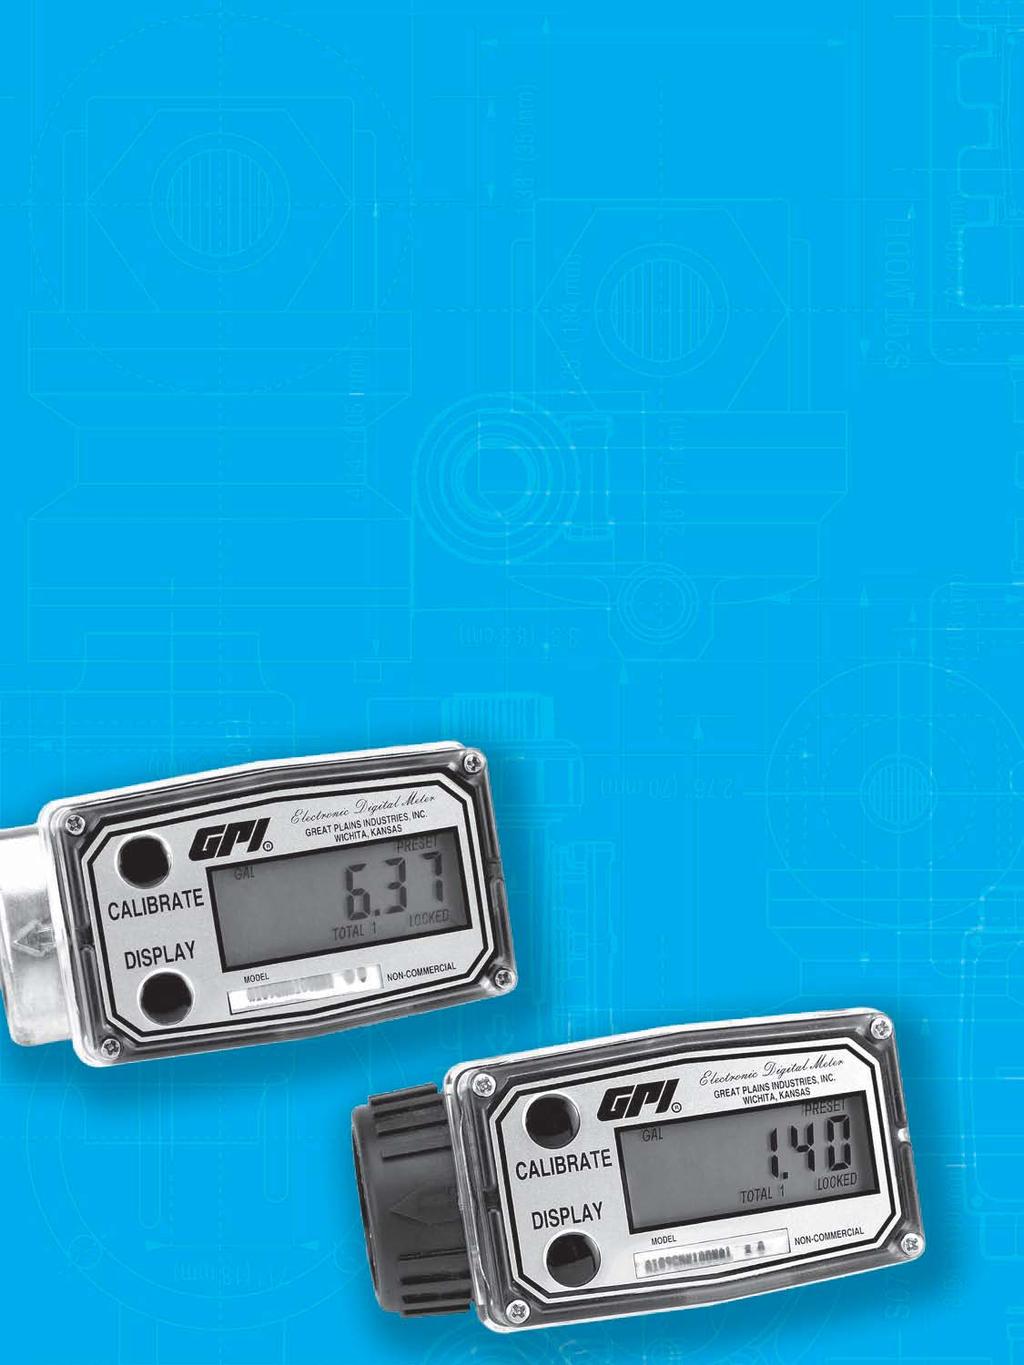 A1 Commercial Grade Meters Commercial Grade Meters are designed as self-contained, battery powered units. These indicating meters come in Aluminum or Nylon only.